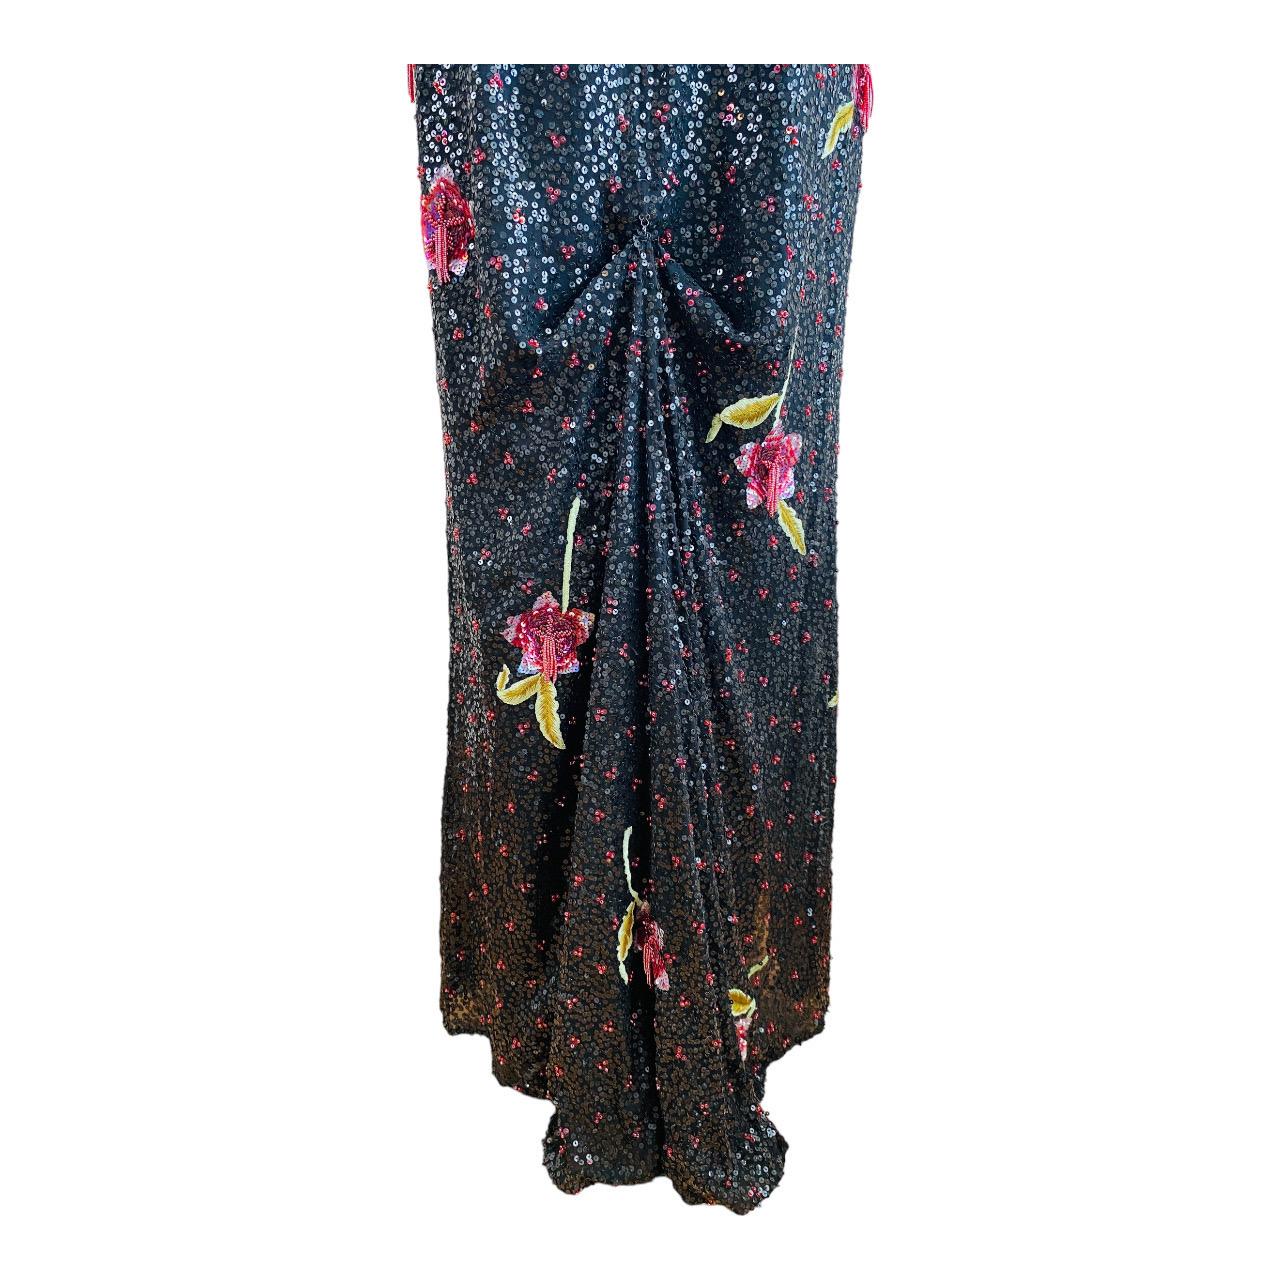 Vintage 2002 Escada Hand Beaded Sequin Floral Maxi Dress Gown Black Pink Flowers For Sale 11